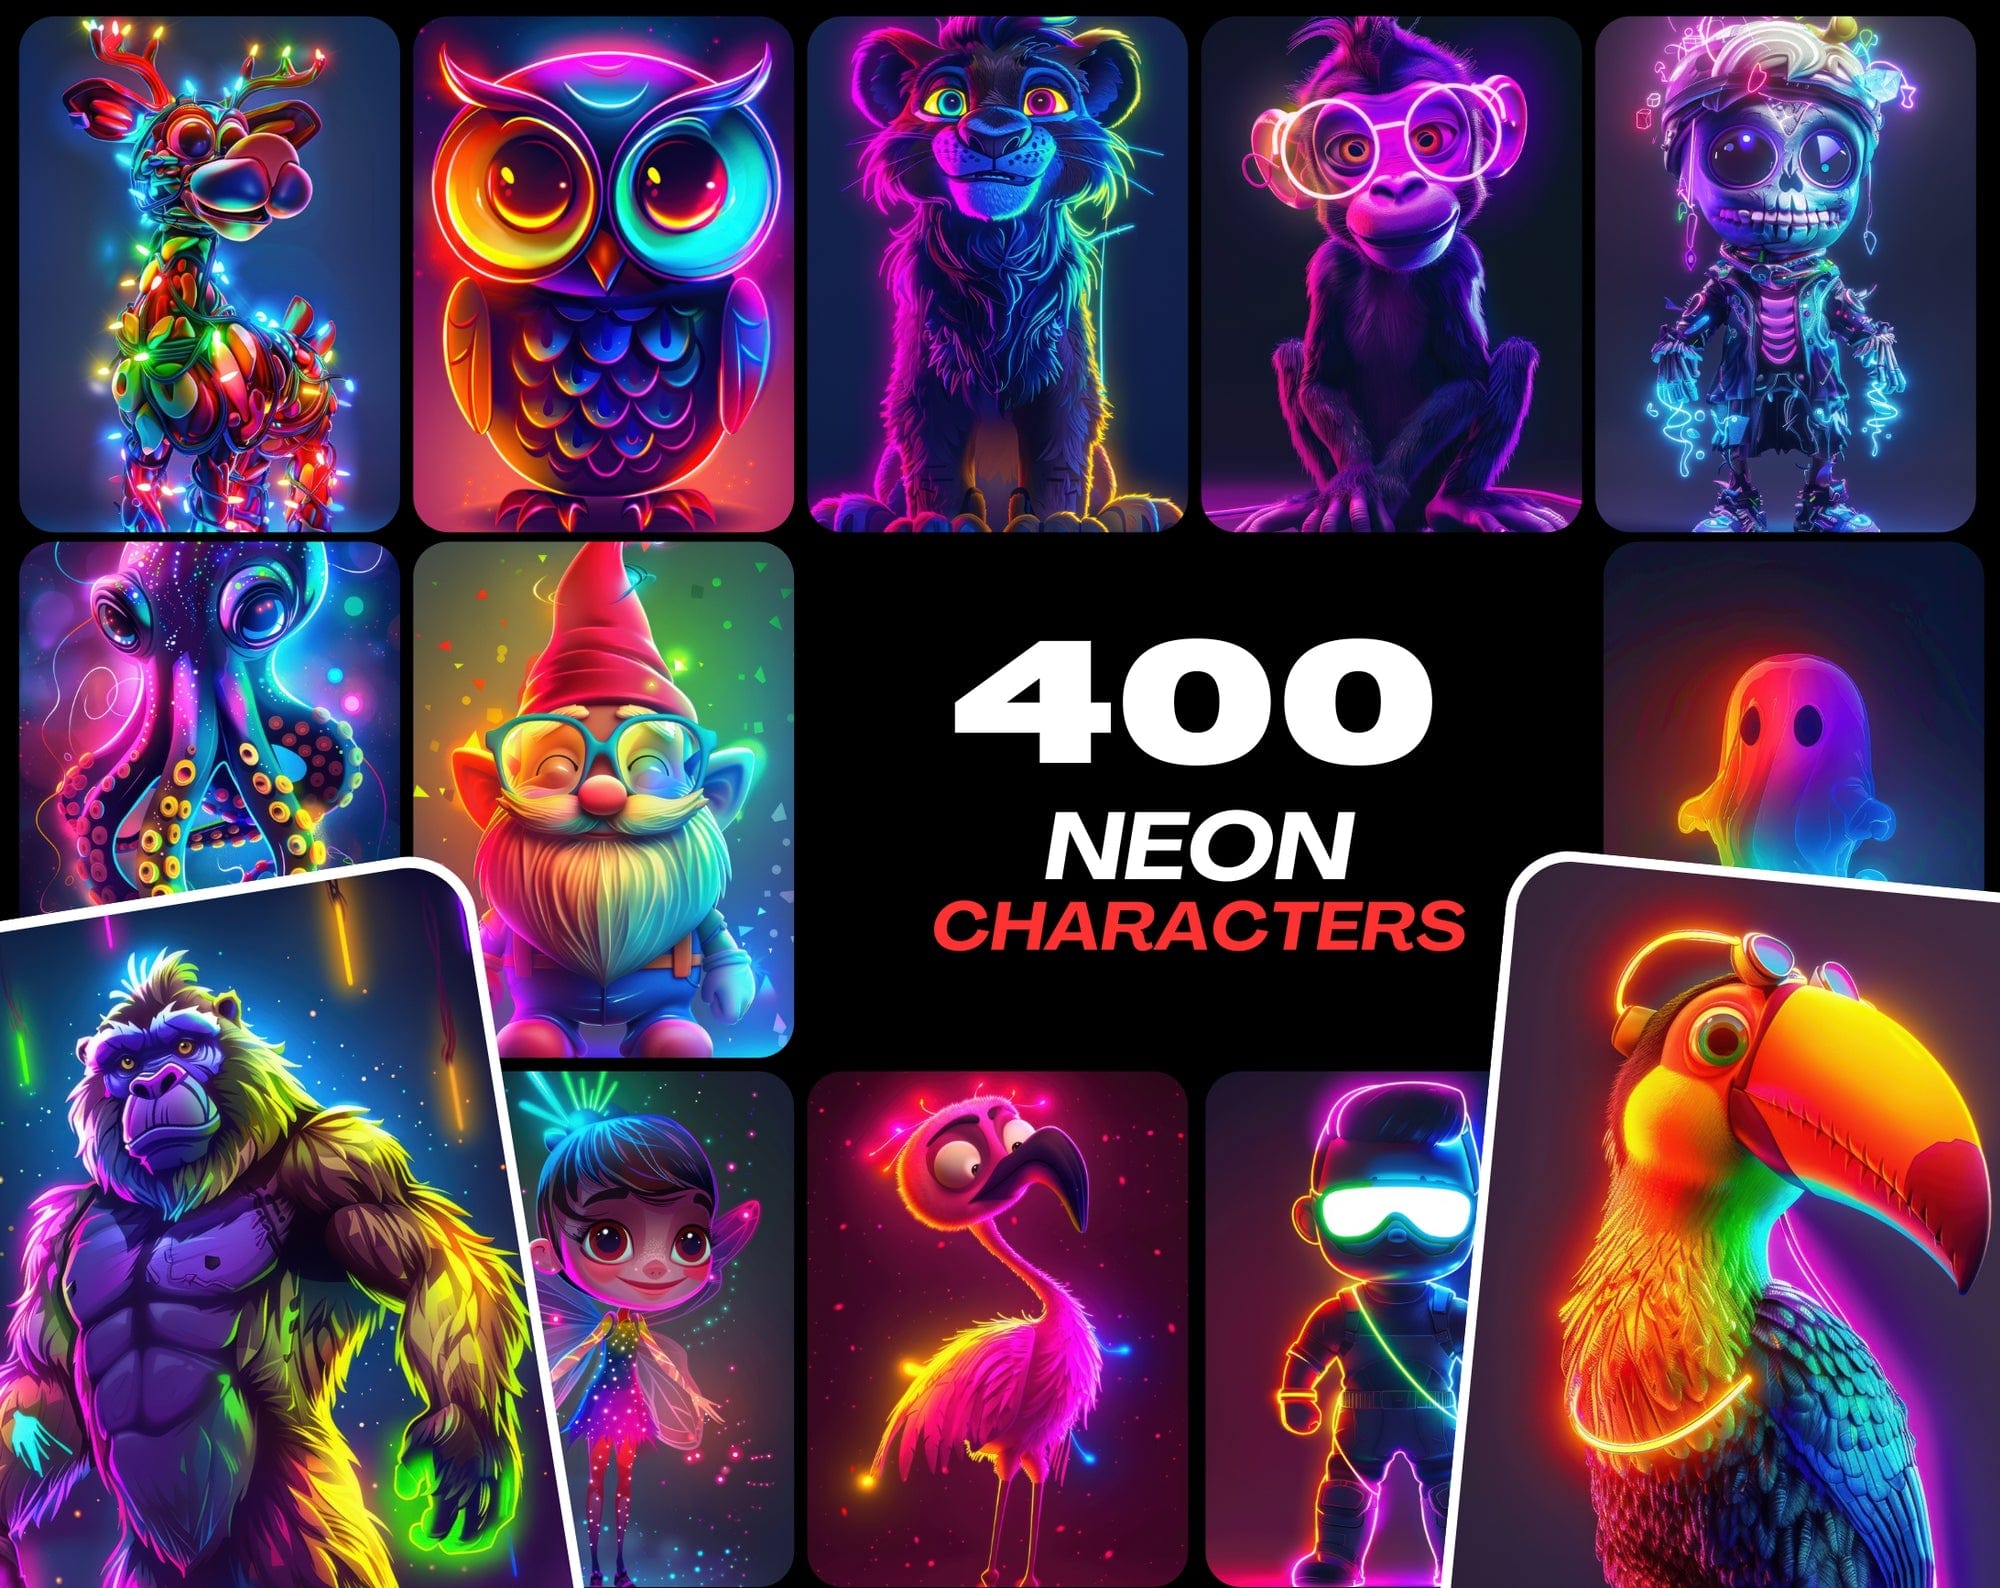 Neon Characters and Animals Collection - 400 Colorful JPG Images with Commercial License Digital Download Sumobundle